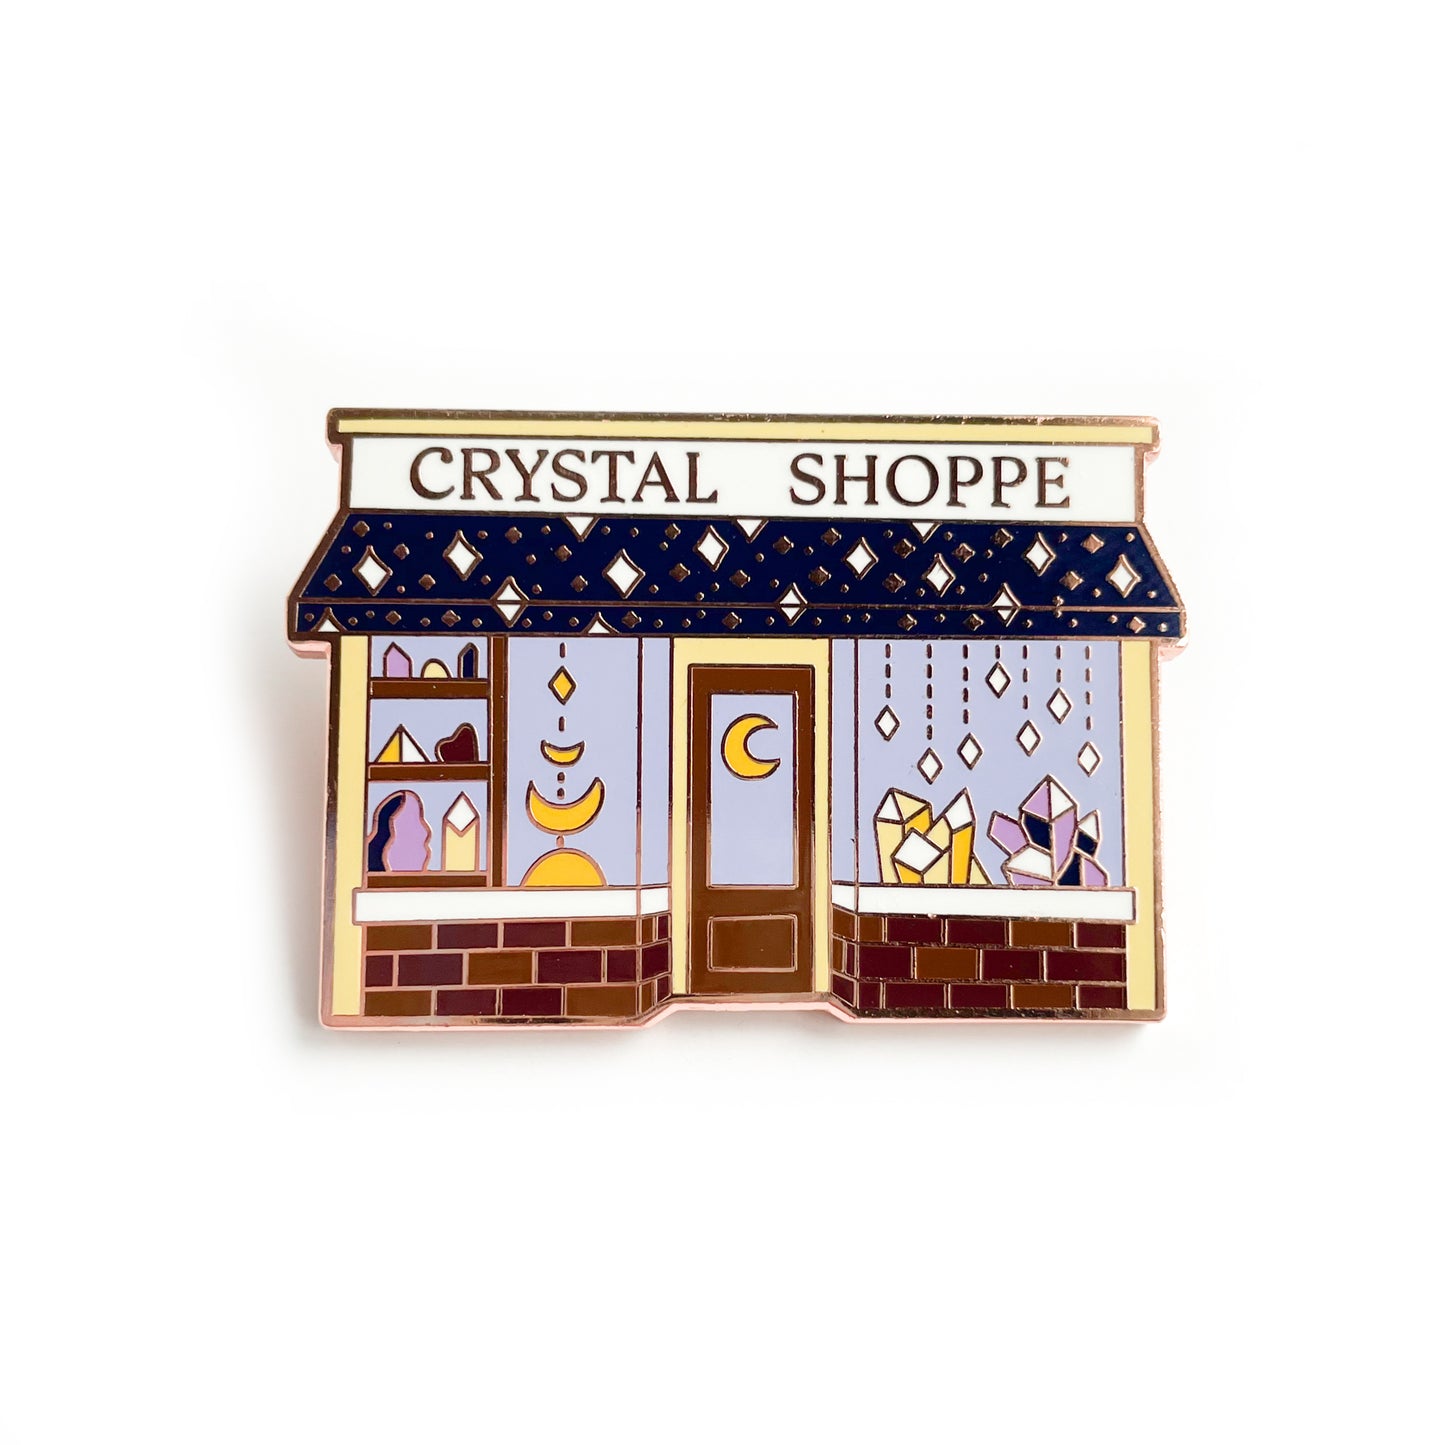 An enamel pin in the shape of shop with the words "Crystal Shoppe" on it. It has a door with a crescent moon on it. The windows are full of crystals in yellow and purple. The awning of the shop has sparkling stars on it and under the front windows are bricks. 